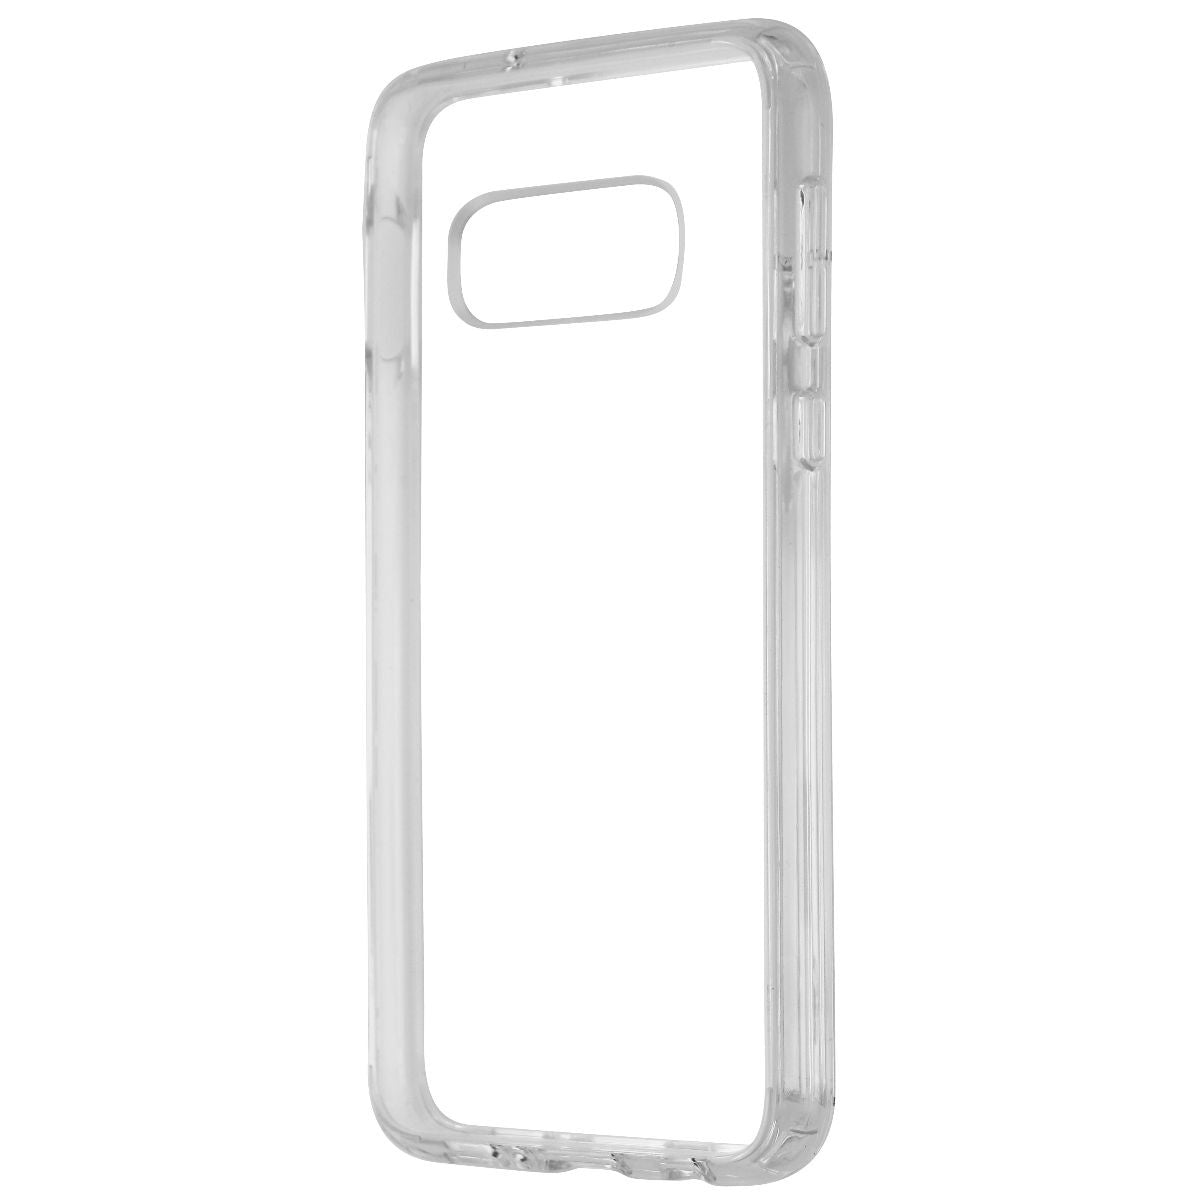 UBREAKIFIX Slim Hardshell Case for Samsung Galaxy S10e Smartphones - Clear Cell Phone - Cases, Covers & Skins UBREAKIFIX    - Simple Cell Bulk Wholesale Pricing - USA Seller